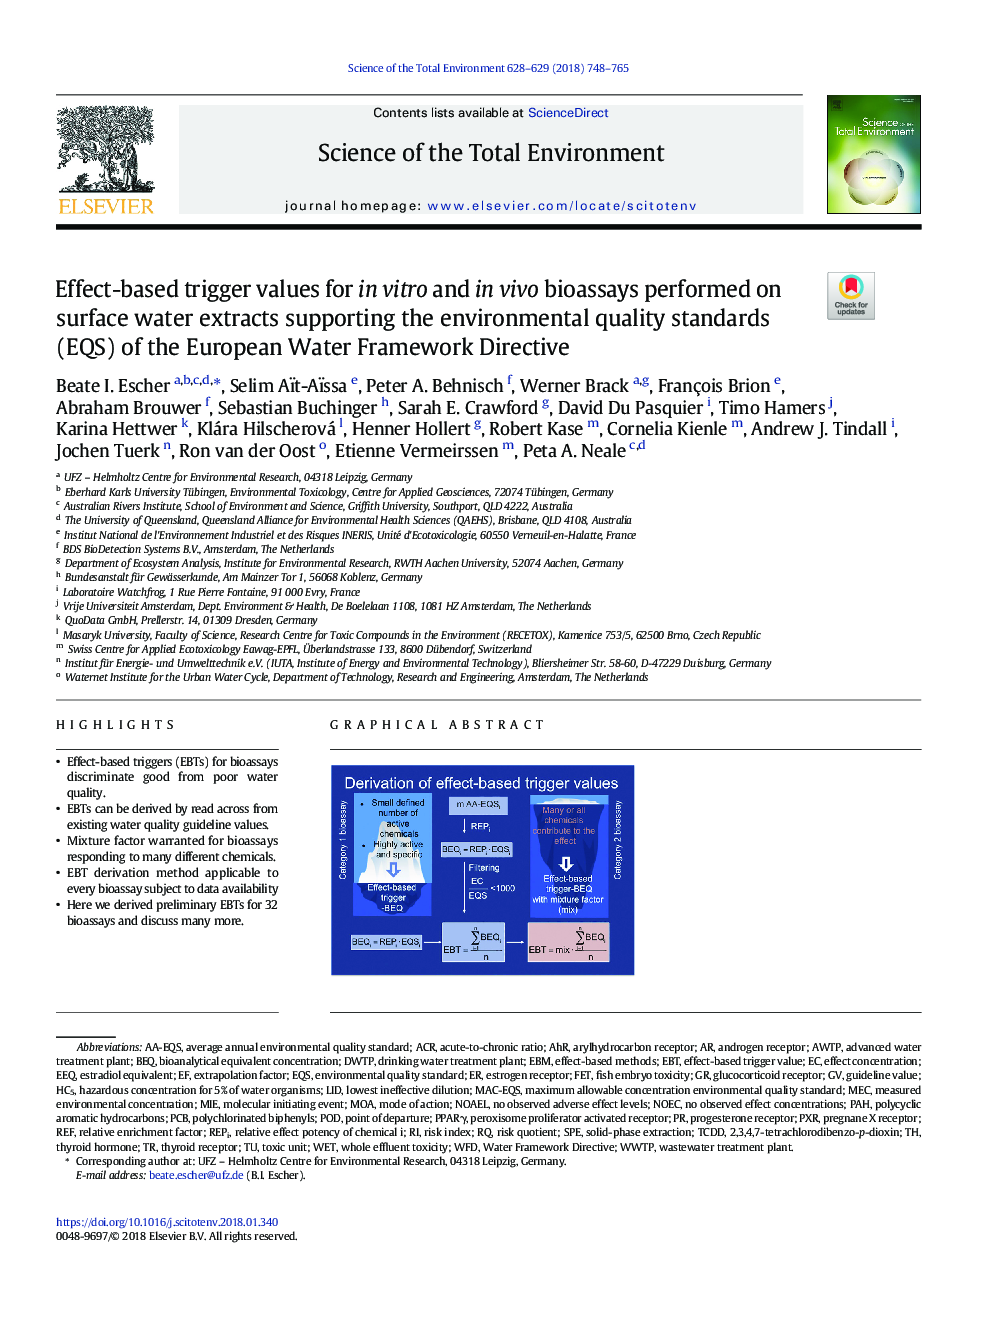 Effect-based trigger values for in vitro and in vivo bioassays performed on surface water extracts supporting the environmental quality standards (EQS) of the European Water Framework Directive